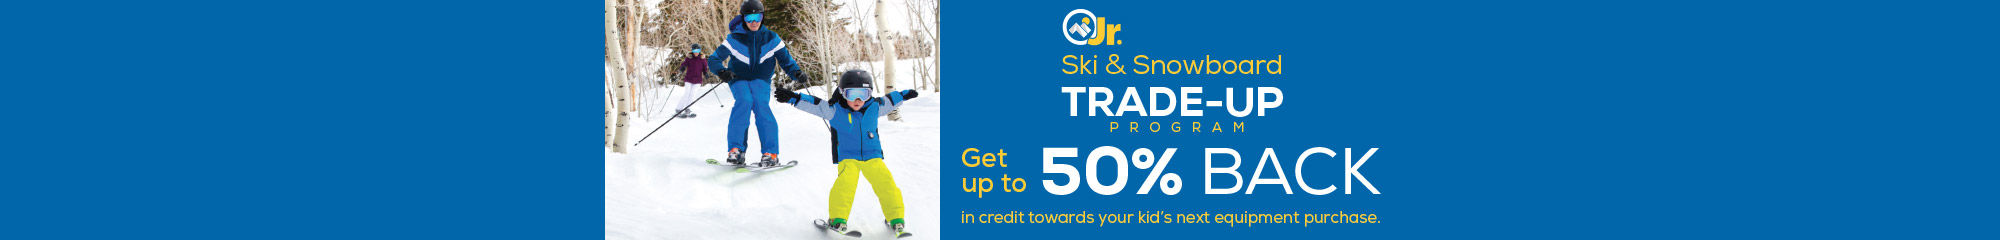 Jr. Ski & Snowboard Trade-Up Program. Get up to 50% back in credit towards your kid's next equipment purchase. 